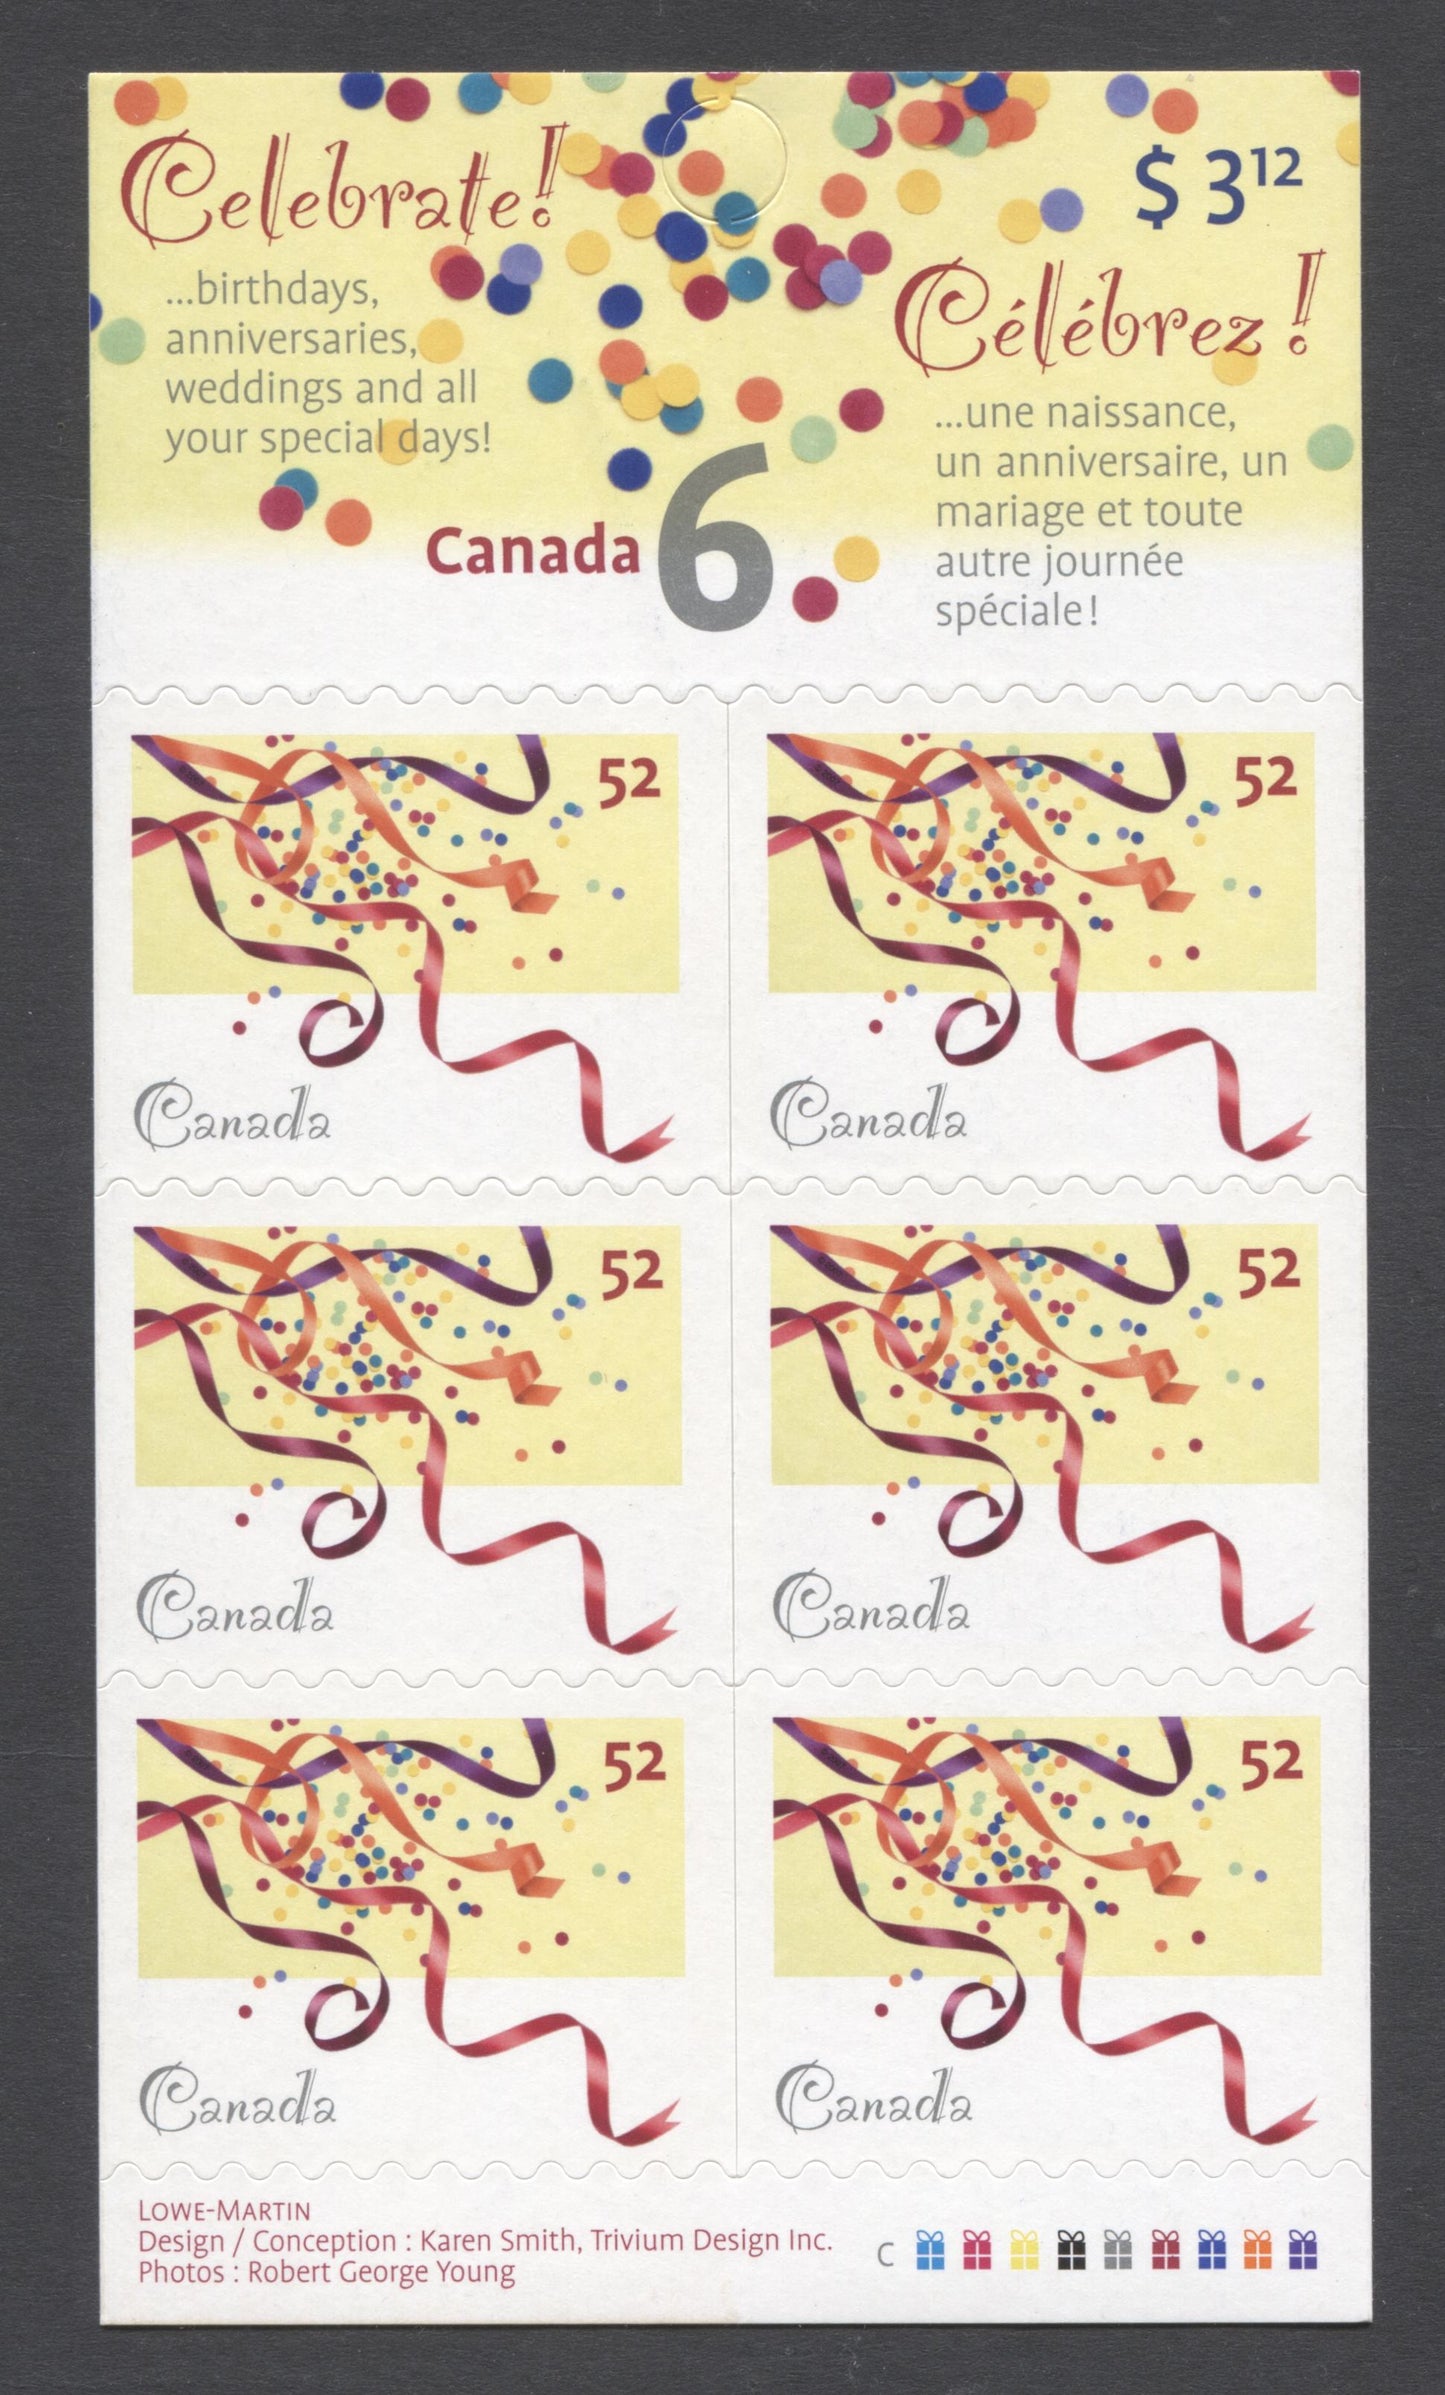 Canada #BK346 2007 Celebrations Issue, Complete $3.12 Booklet, Tullis Russell Coatings Paper, Dead Paper, 4 mm GT-4 Tagging